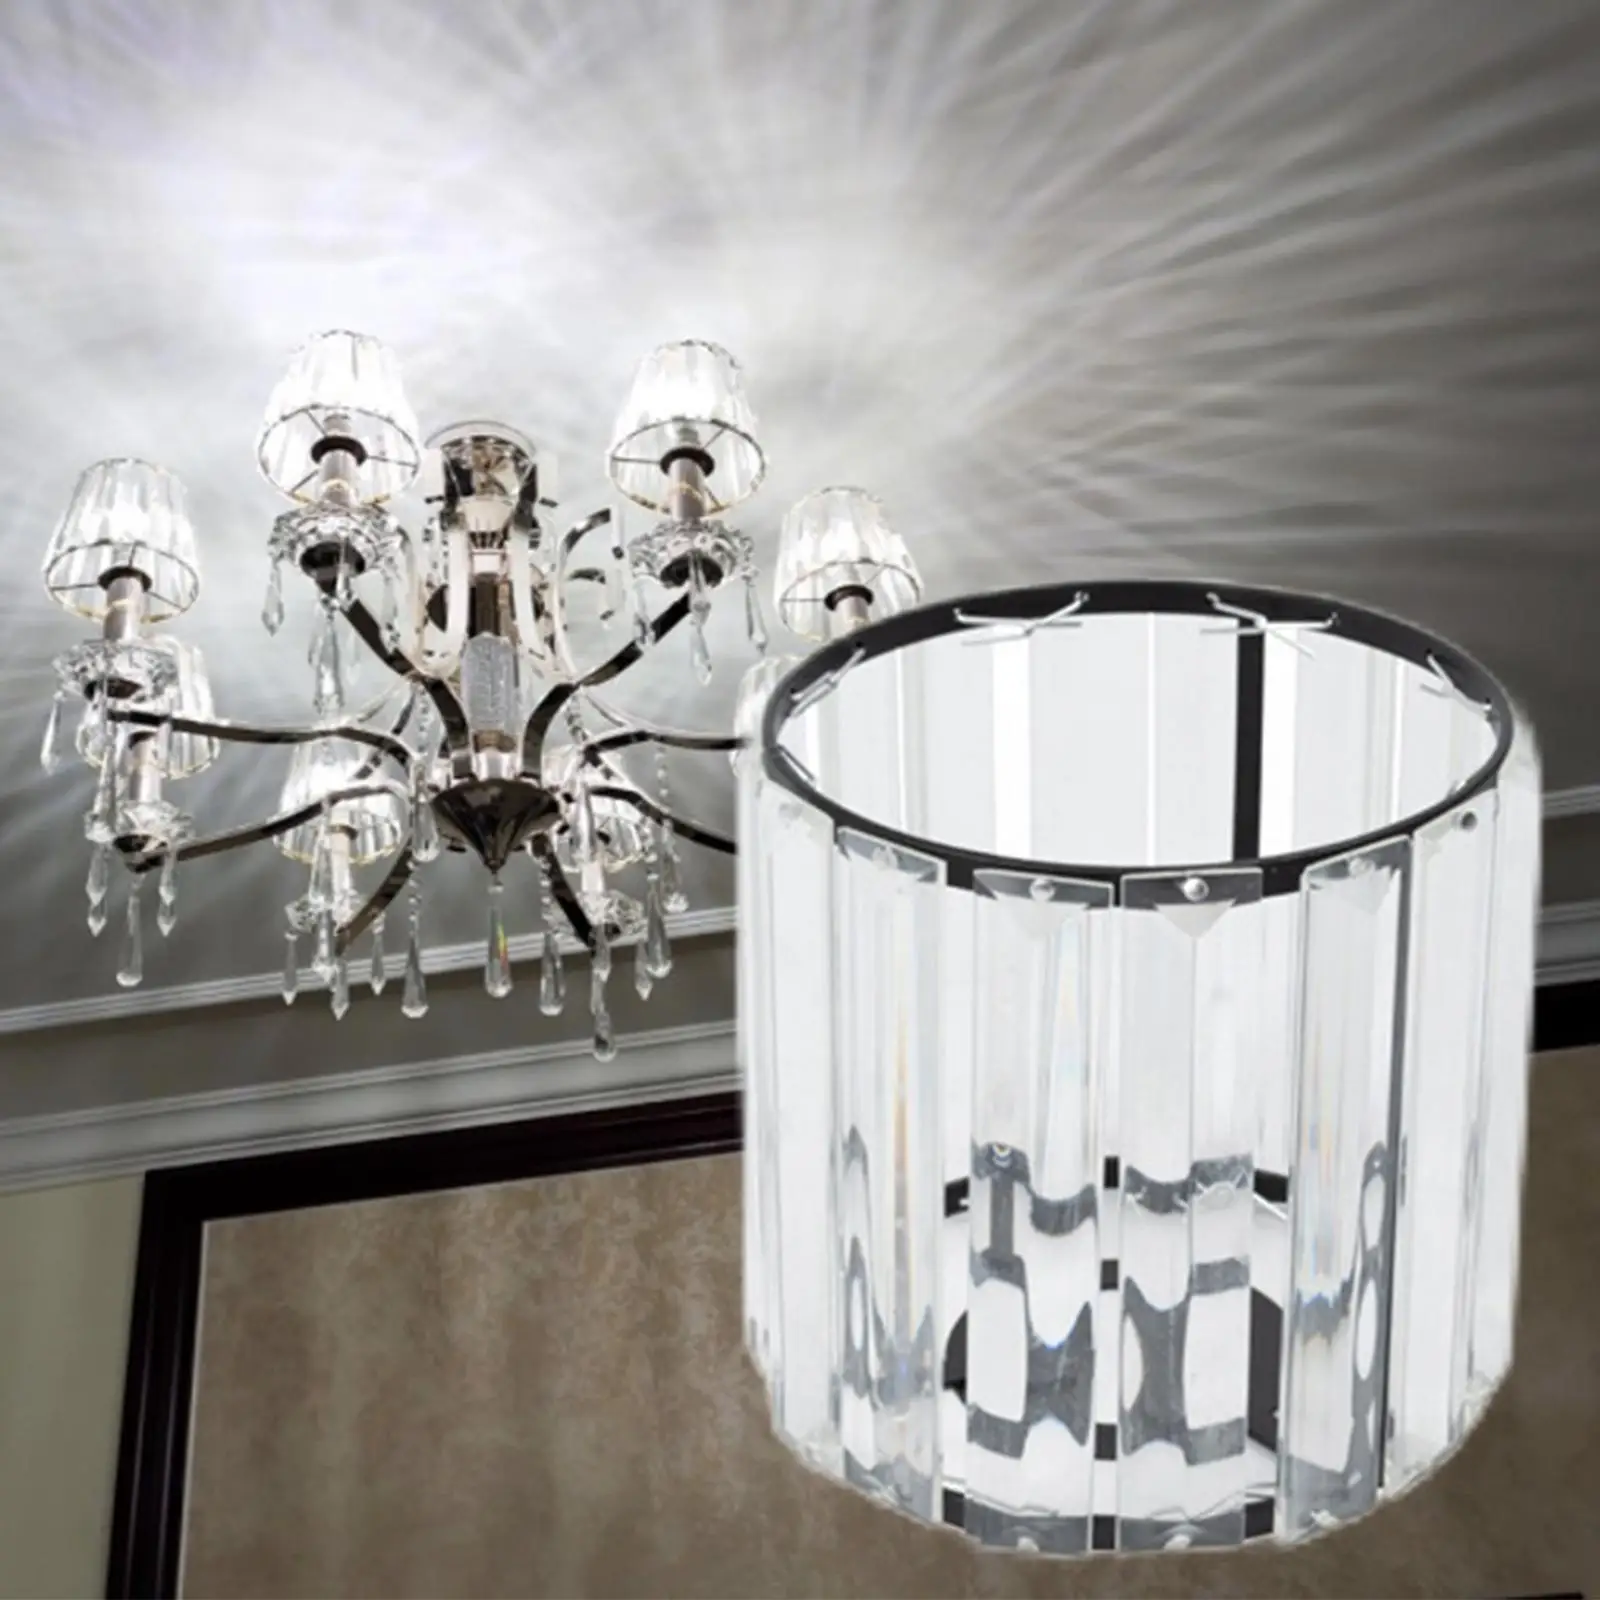 Clear Crystal Shade Cover Replacements, Cylinder Crystal Lamp Shade Replacement